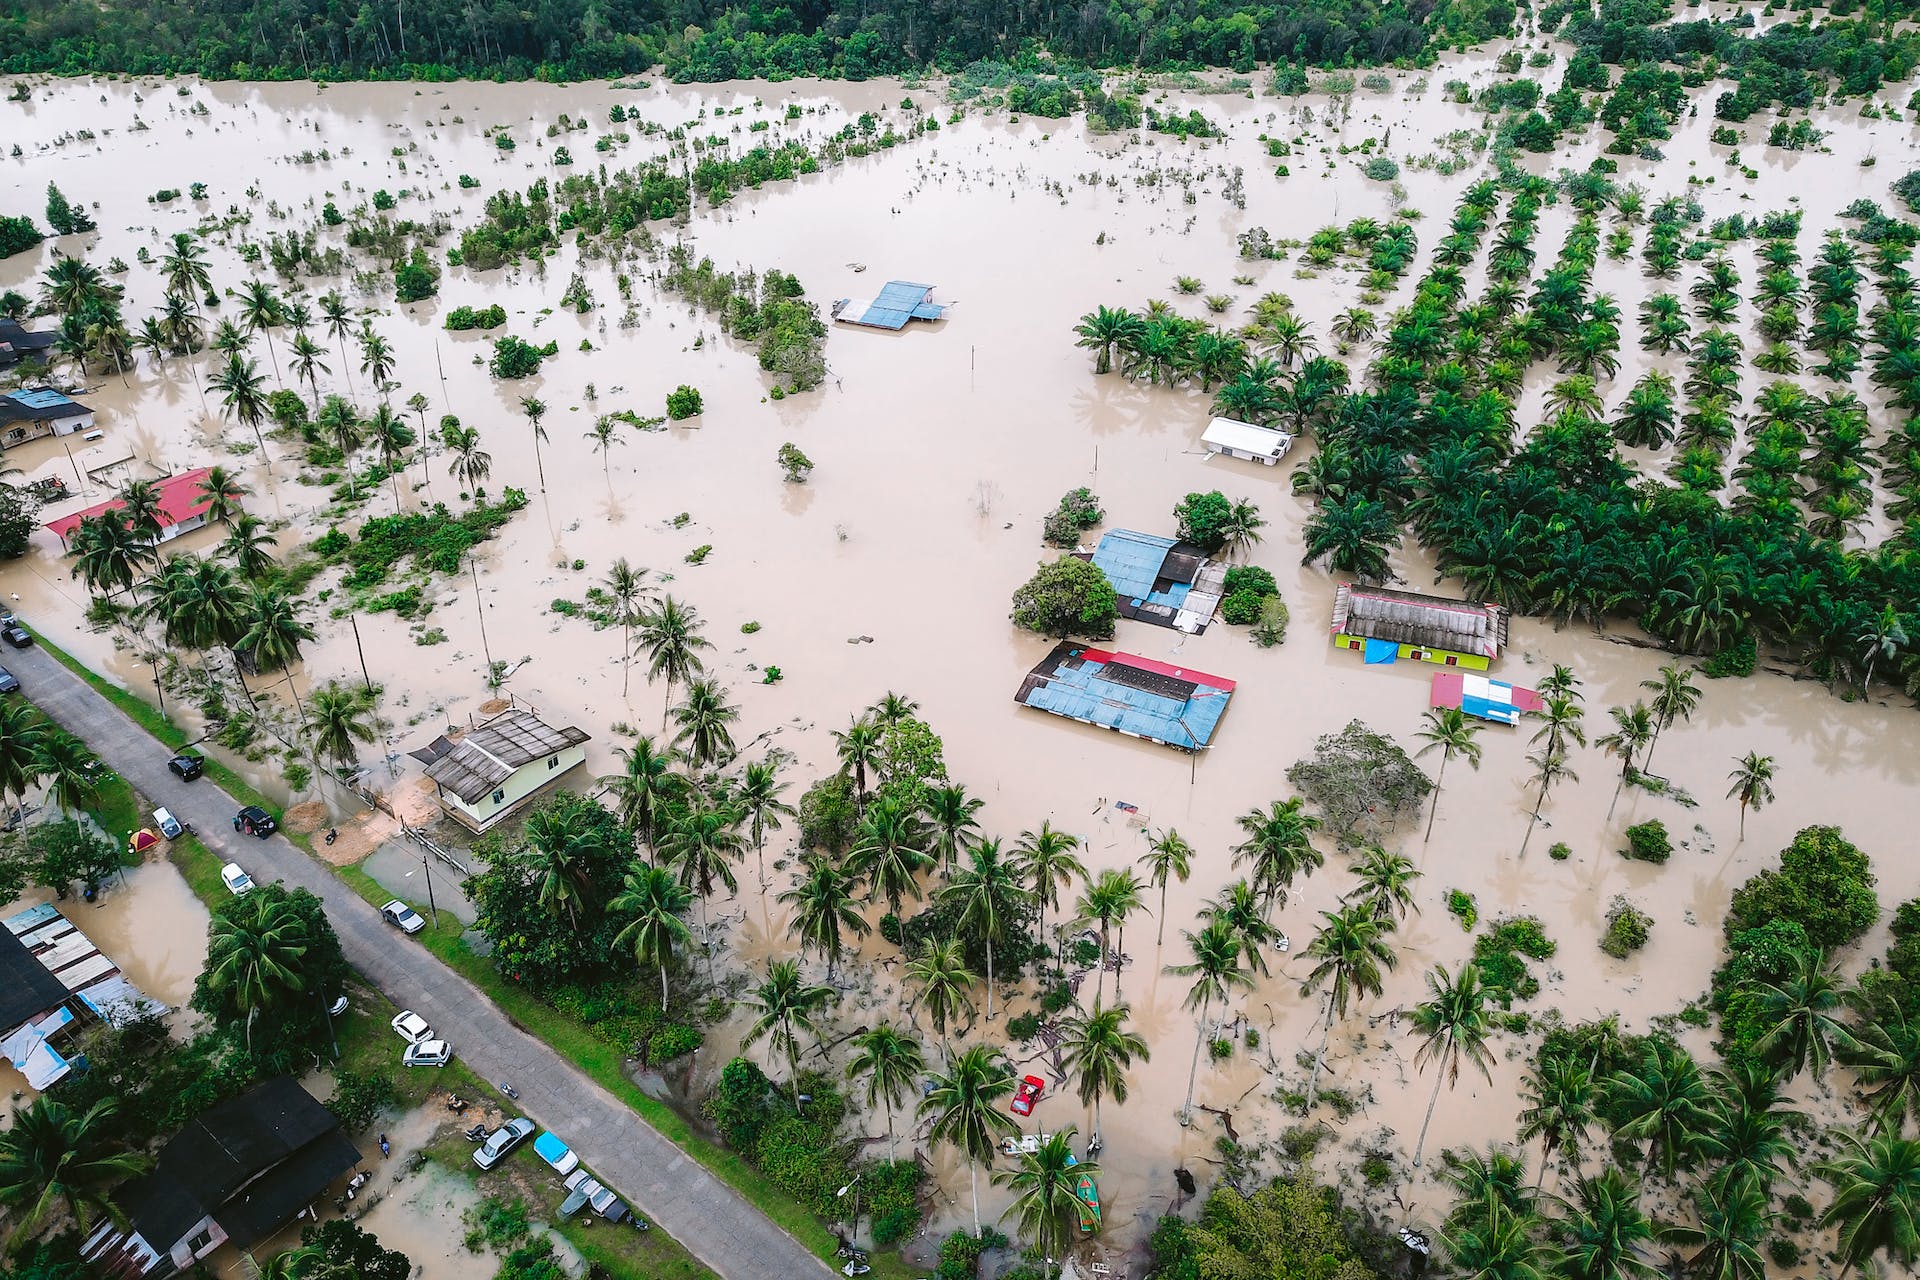 Asia At Risk Amid Scientific Warnings of Heavier Rainfalls and Increasing Flood Risk